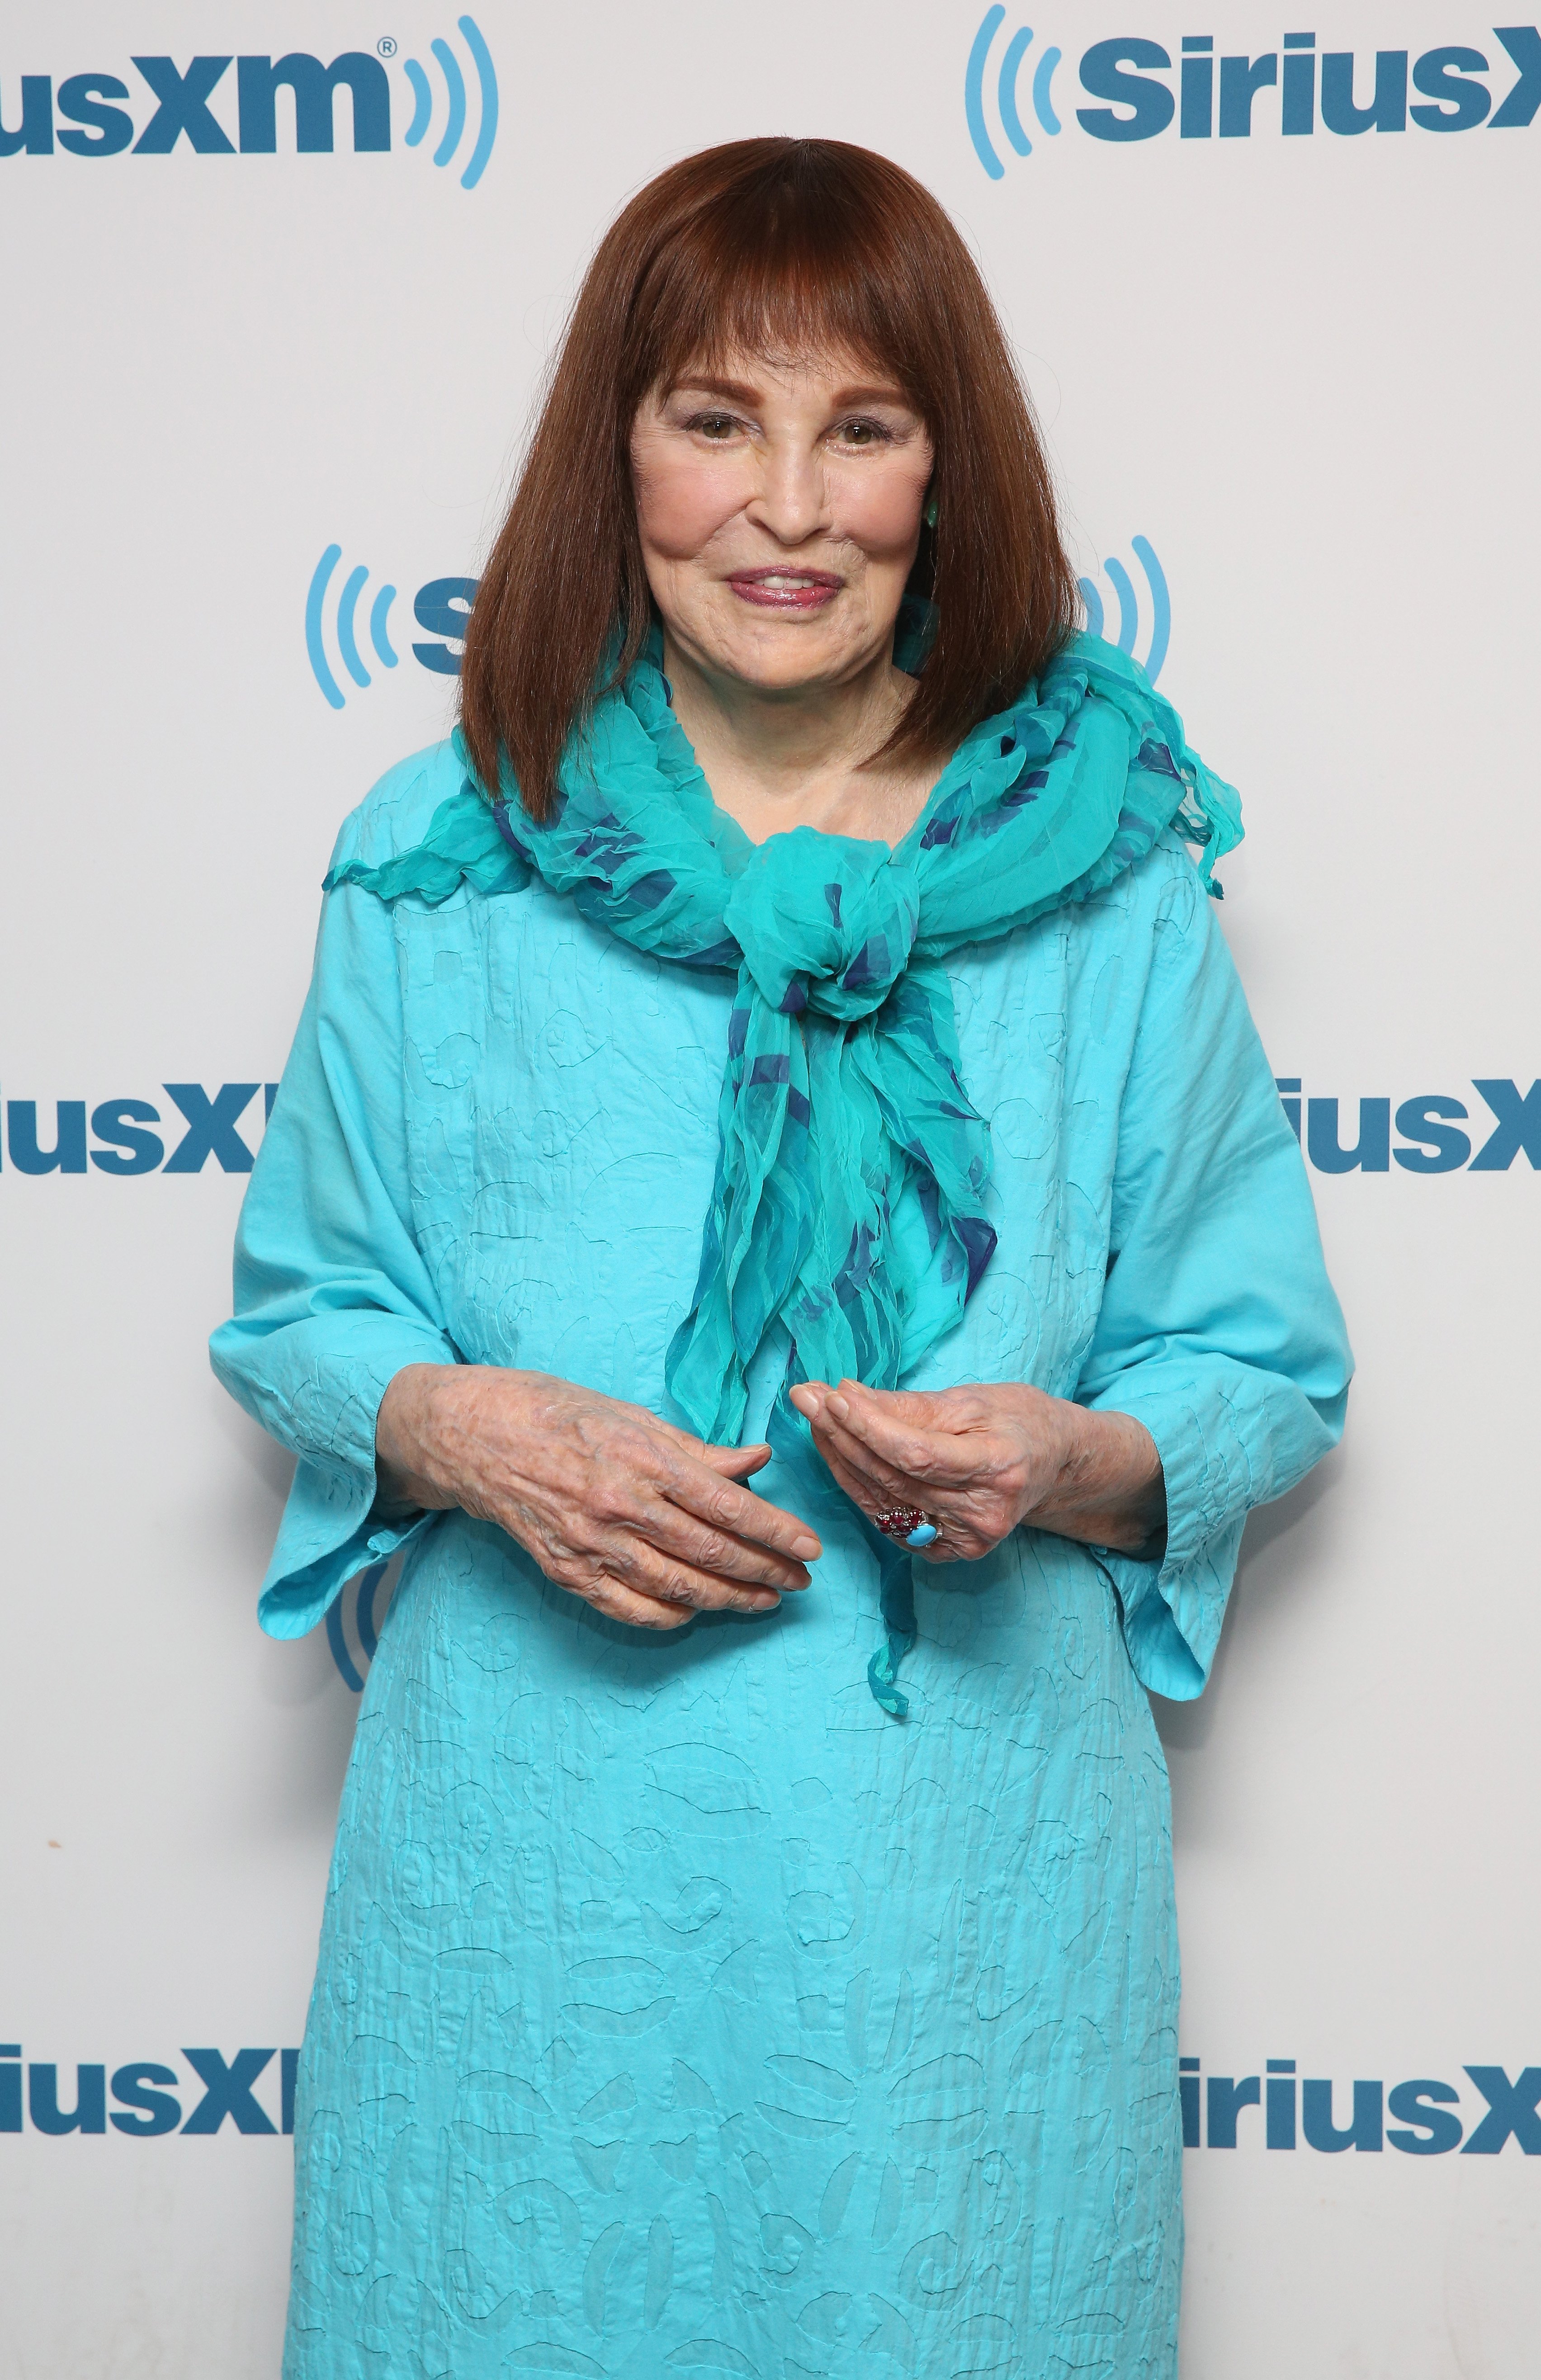 Gloria Vanderbilt attends SiriusXM's 'Town Hall' on July 14, 2016, in New York City. | Source: Getty Images.